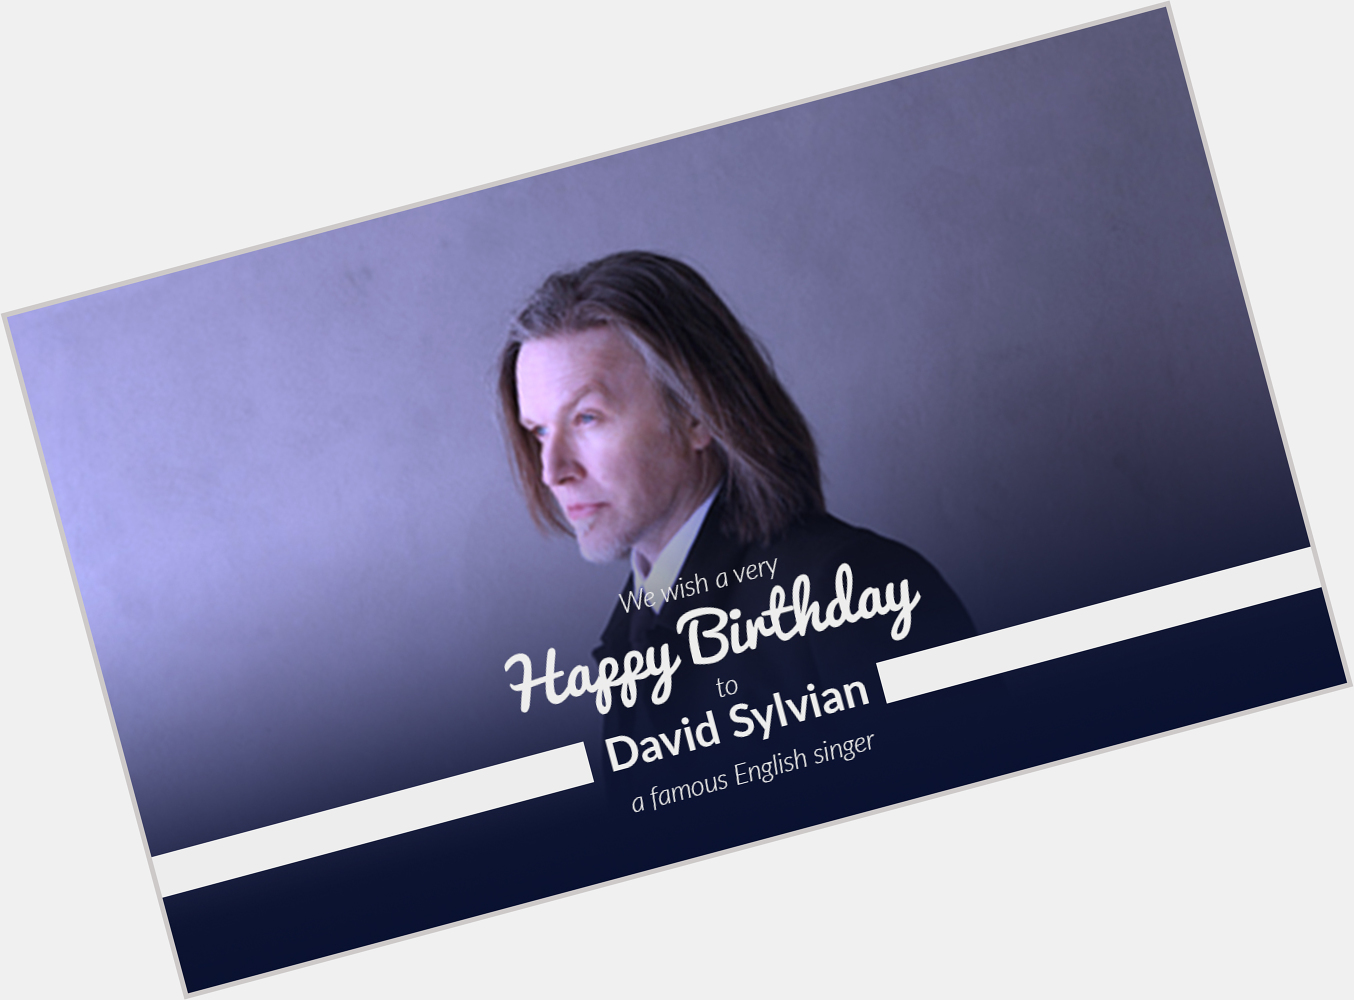 Happy Birthday to the David Sylvian, a famous English singer who was born on 23 Feb 1958. 